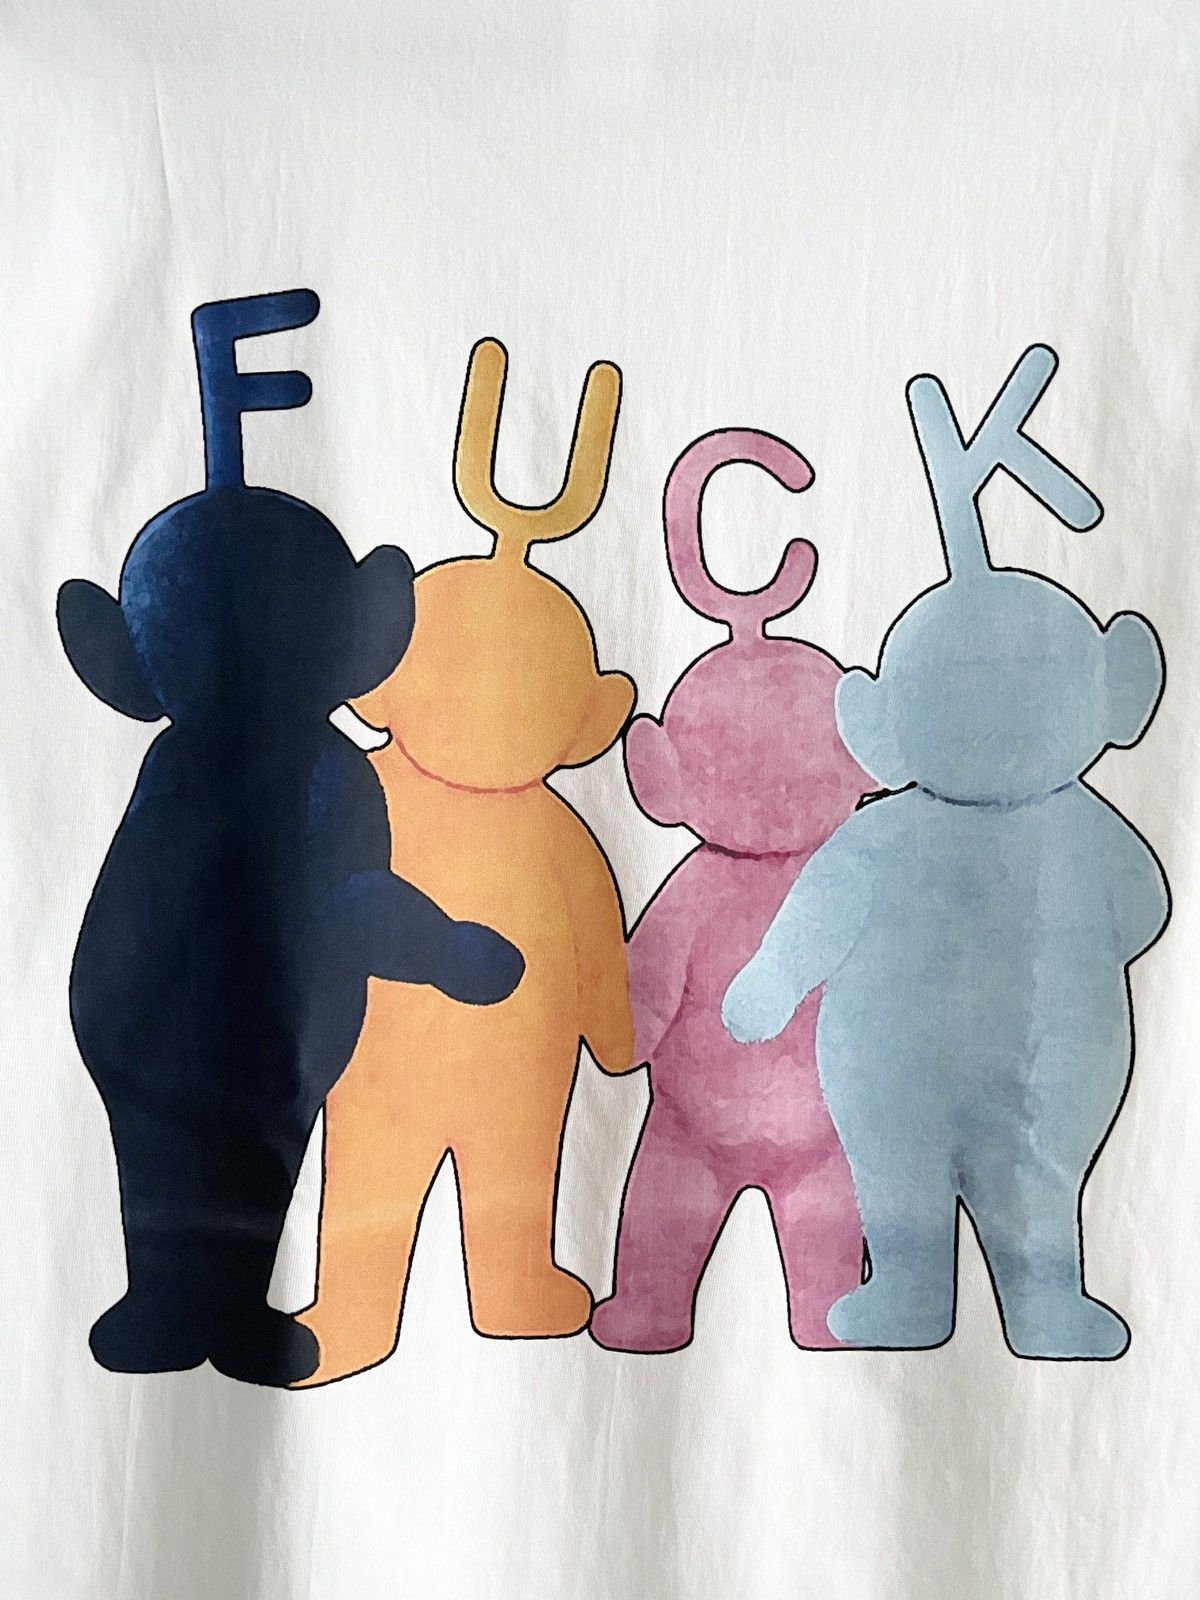 Humor - STEAL! 2000s Teletubbies FUCK Family Characters Tee (L) - 5